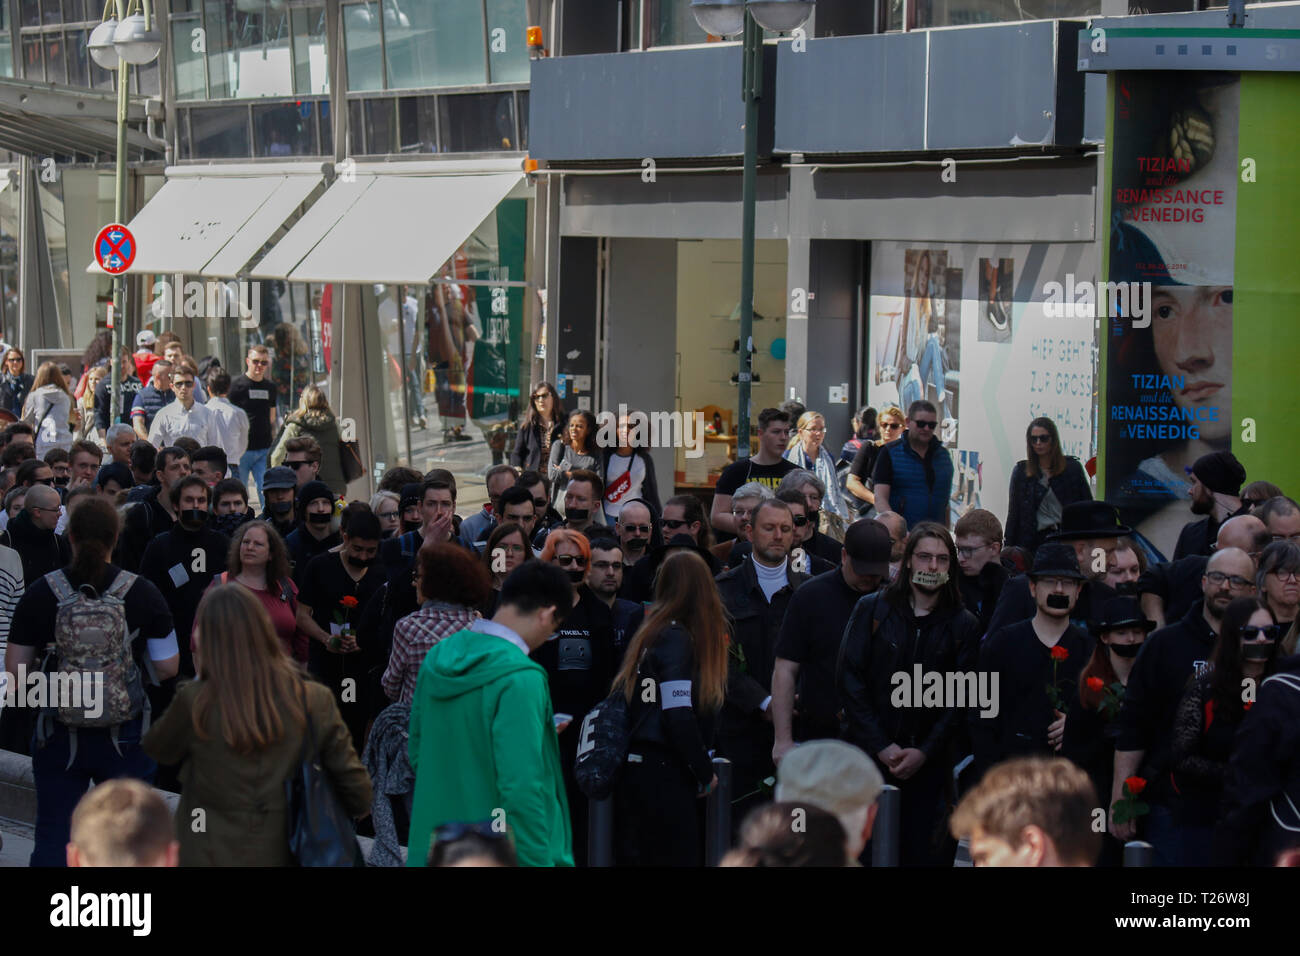 Frankfurt, Germany. 30th March 2019. The mourner follow the pallbearers who carry the coffin through the city centre of Frankfurt. Around 100 people marched through the centre of Frankfurt, to mourn the free Internet, after the EU Parliament has voted in favour of the EU Copyright Directive. They were carrying a coffin and were reading eulogies to the Internet. Stock Photo